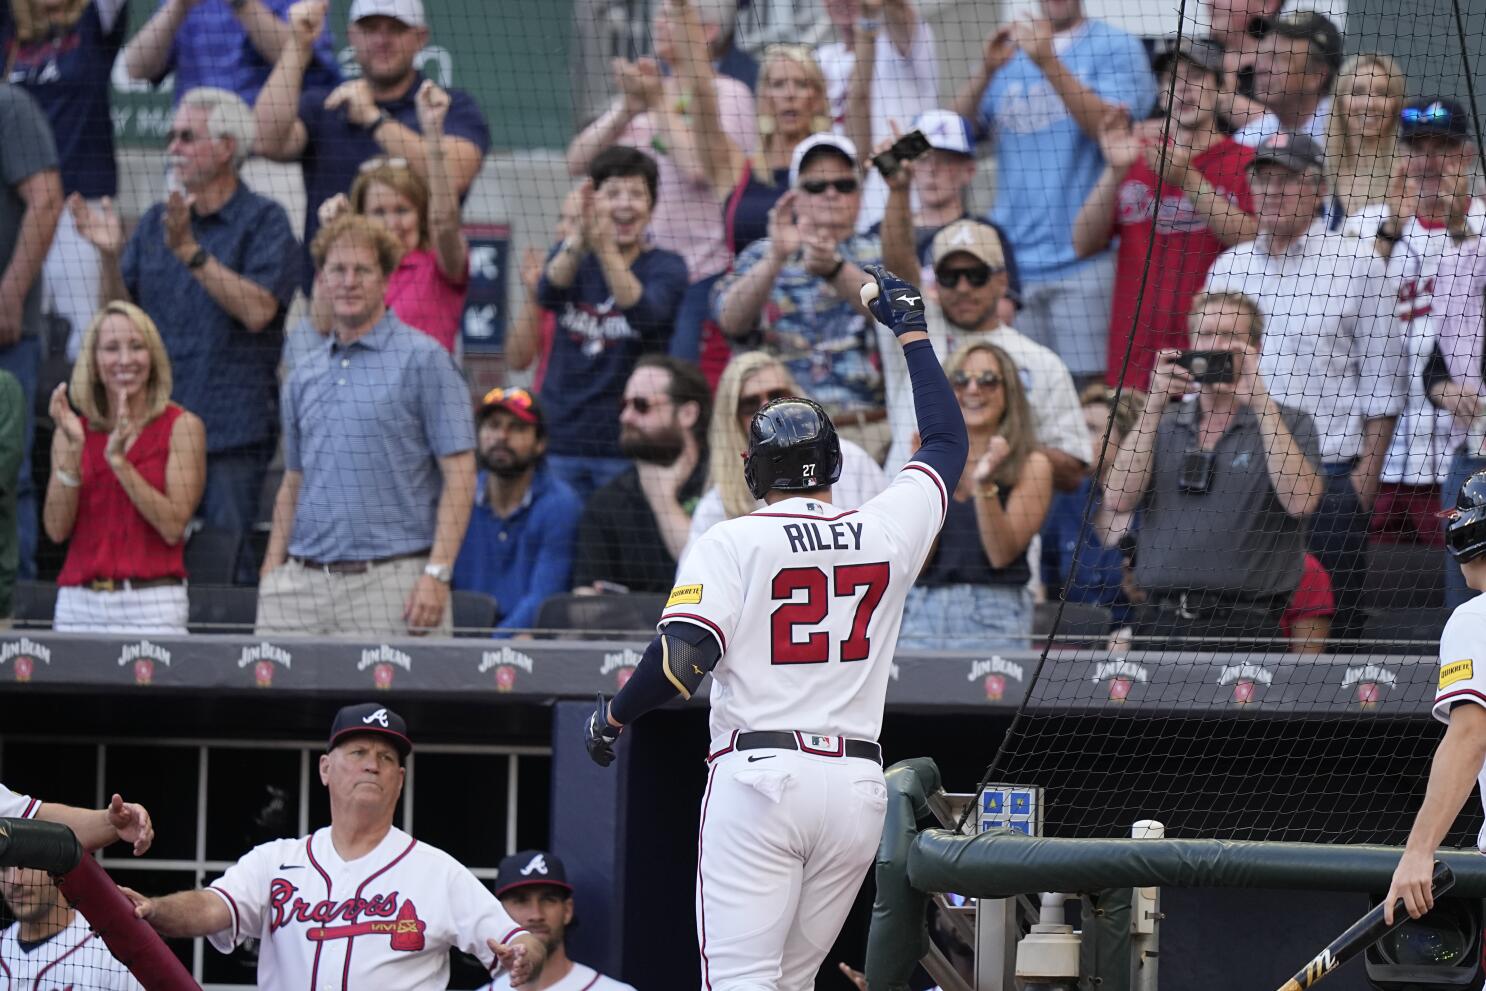 Braves fans told to be patient but deserved better this offseason